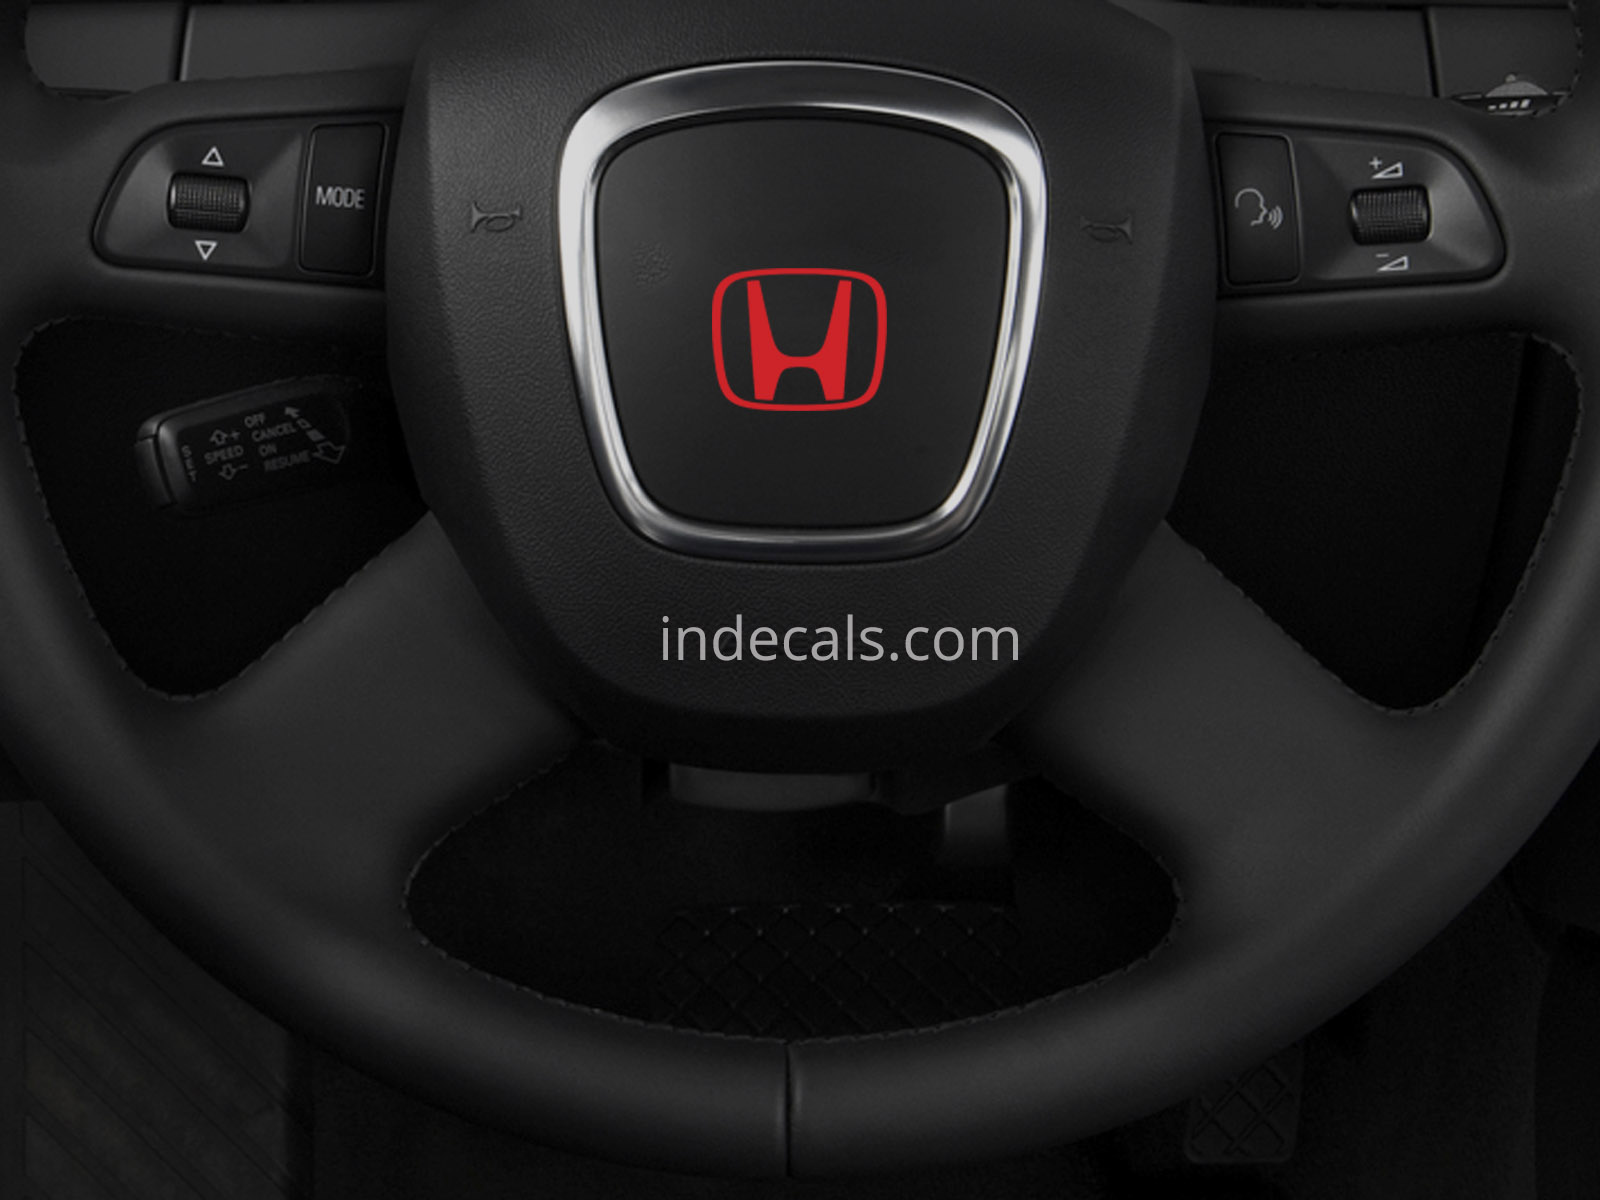 3 x Honda Stickers for Steering Wheel - Red